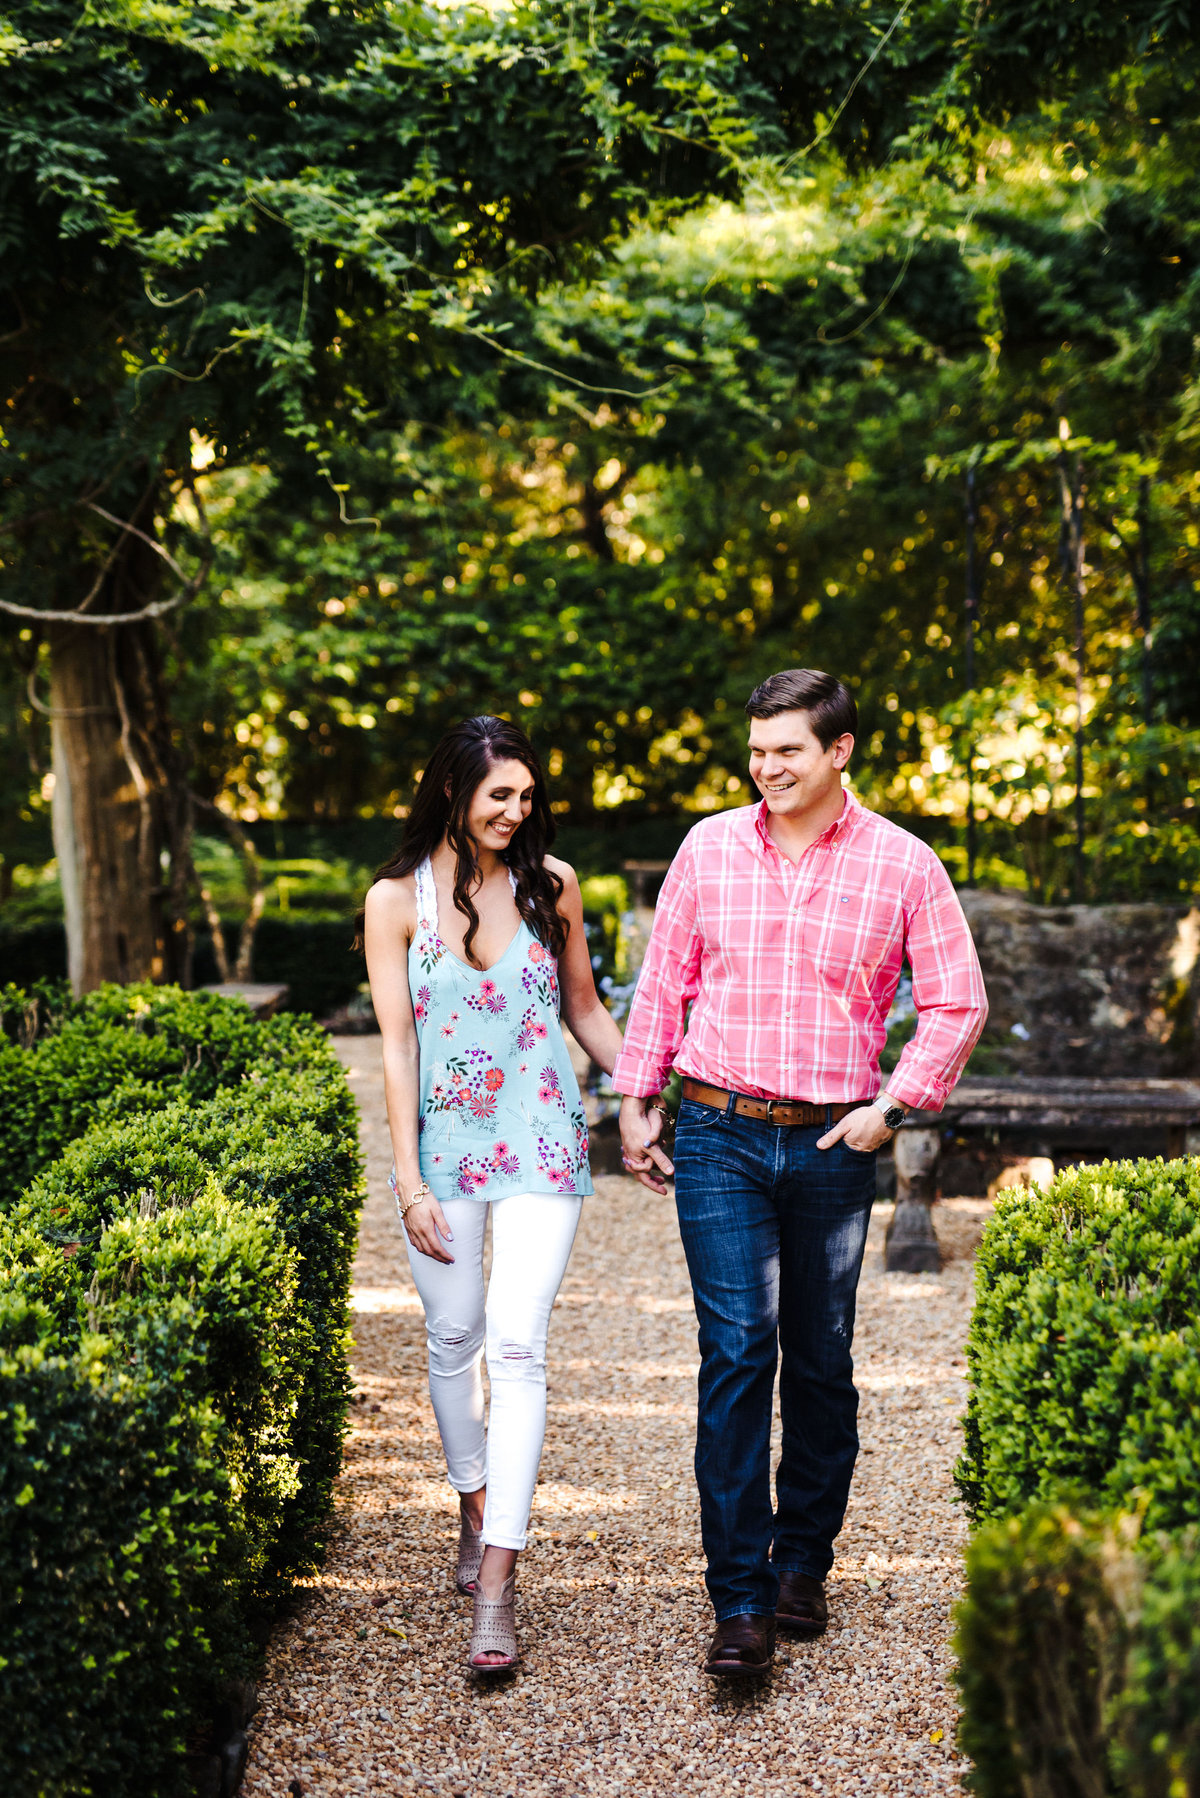 Hills and Dales Estate Engagement Session - 8